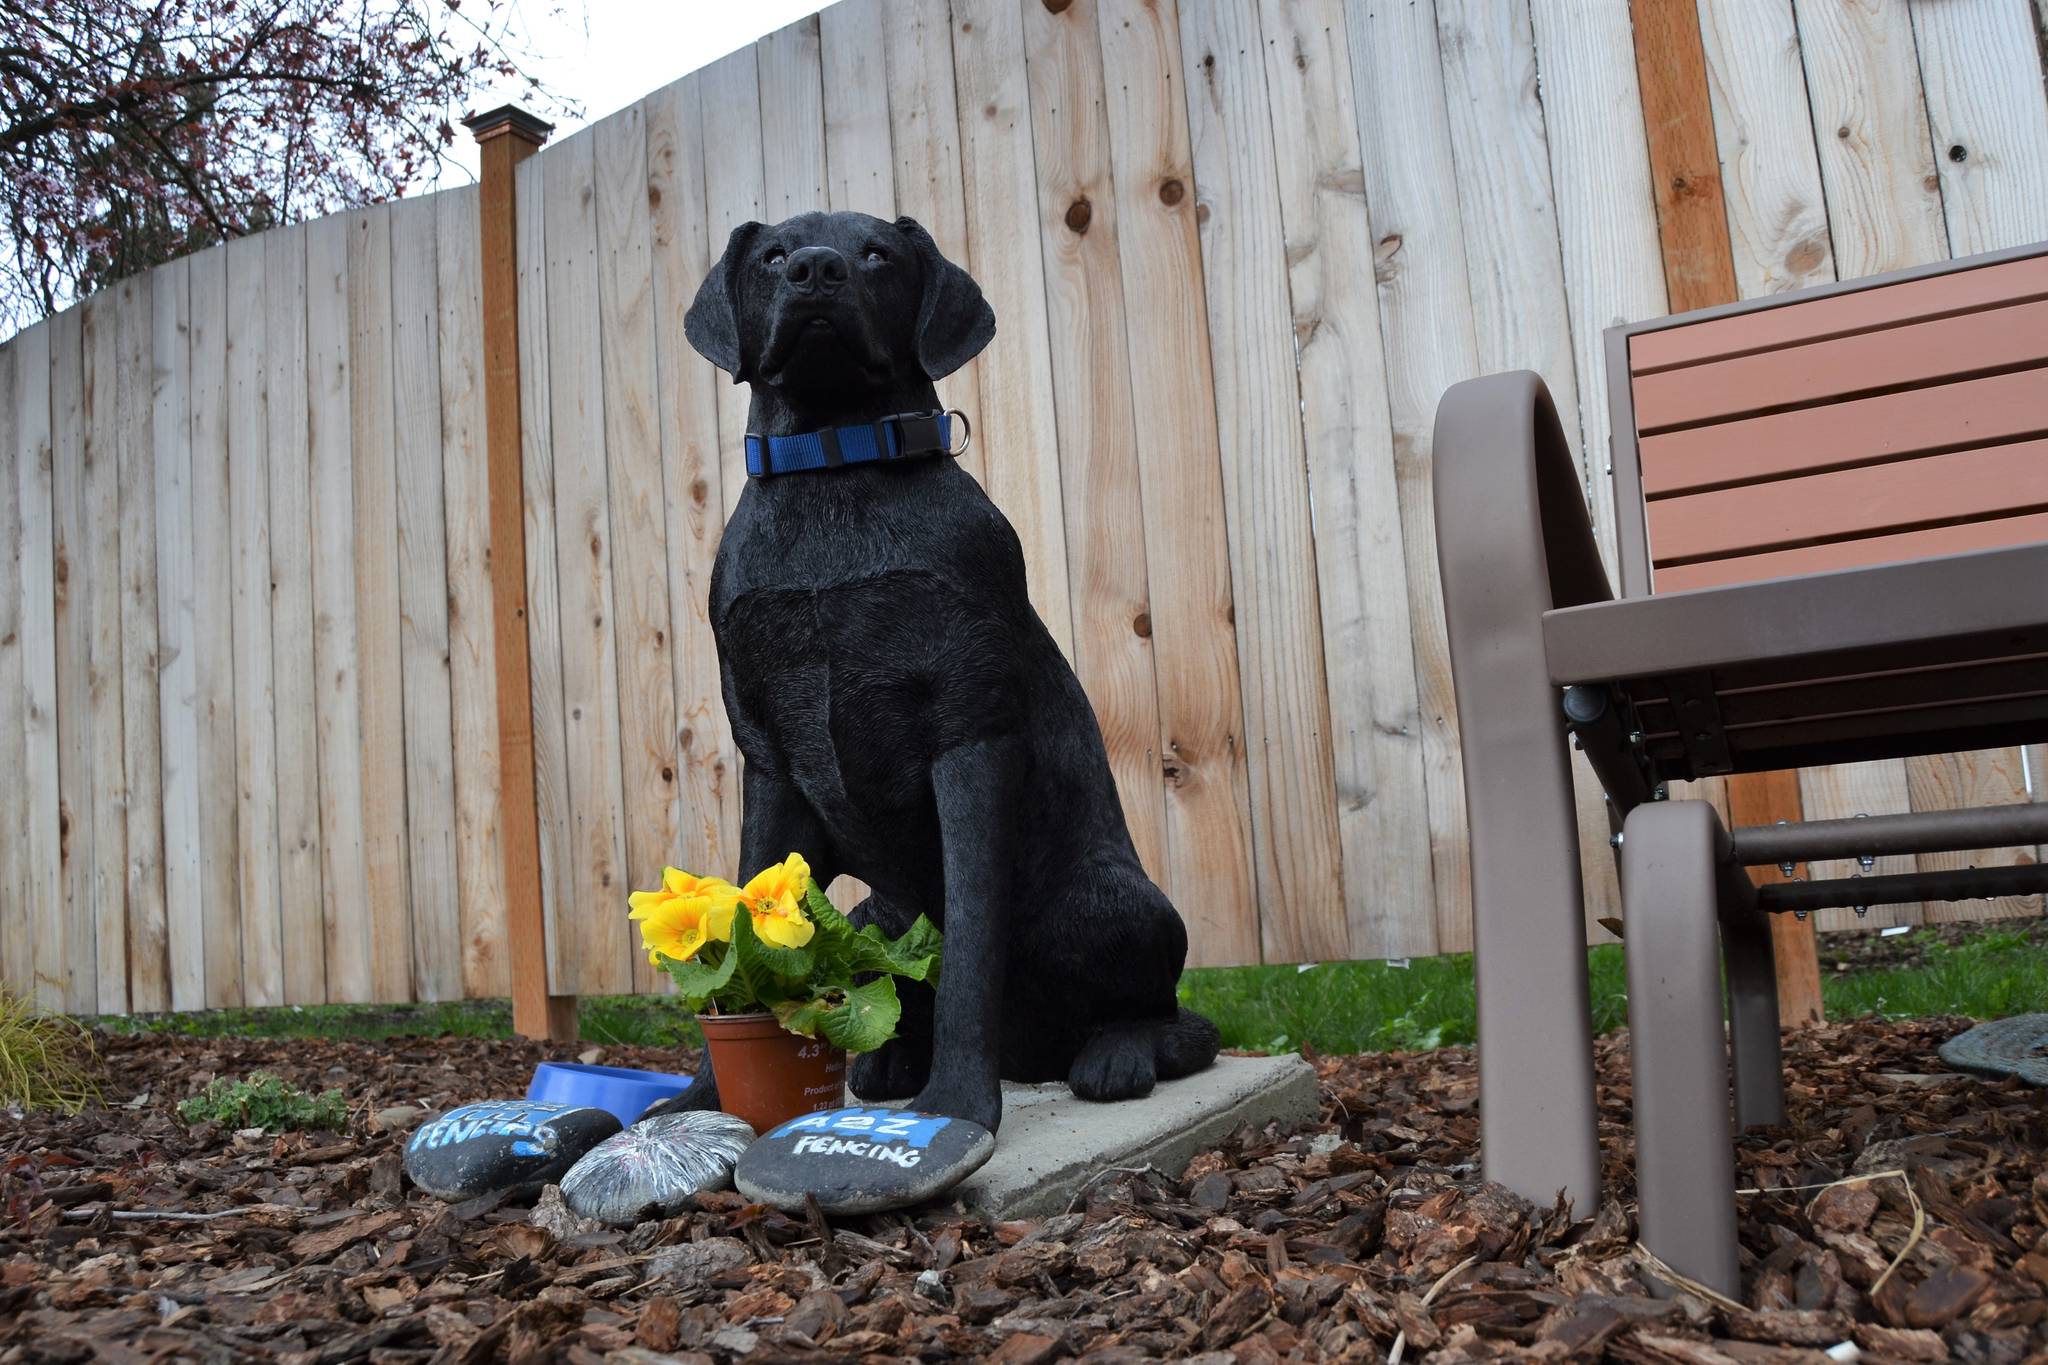 Kevin Cassidy installed a new Stolli the dog statue on March 16 after the previous one was stolen and broken. It memorialized his dog who often sat on the corner of Hendrickson and Priest roads and interacted with locals. (Matthew Nash/Olympic Peninsula New Group)